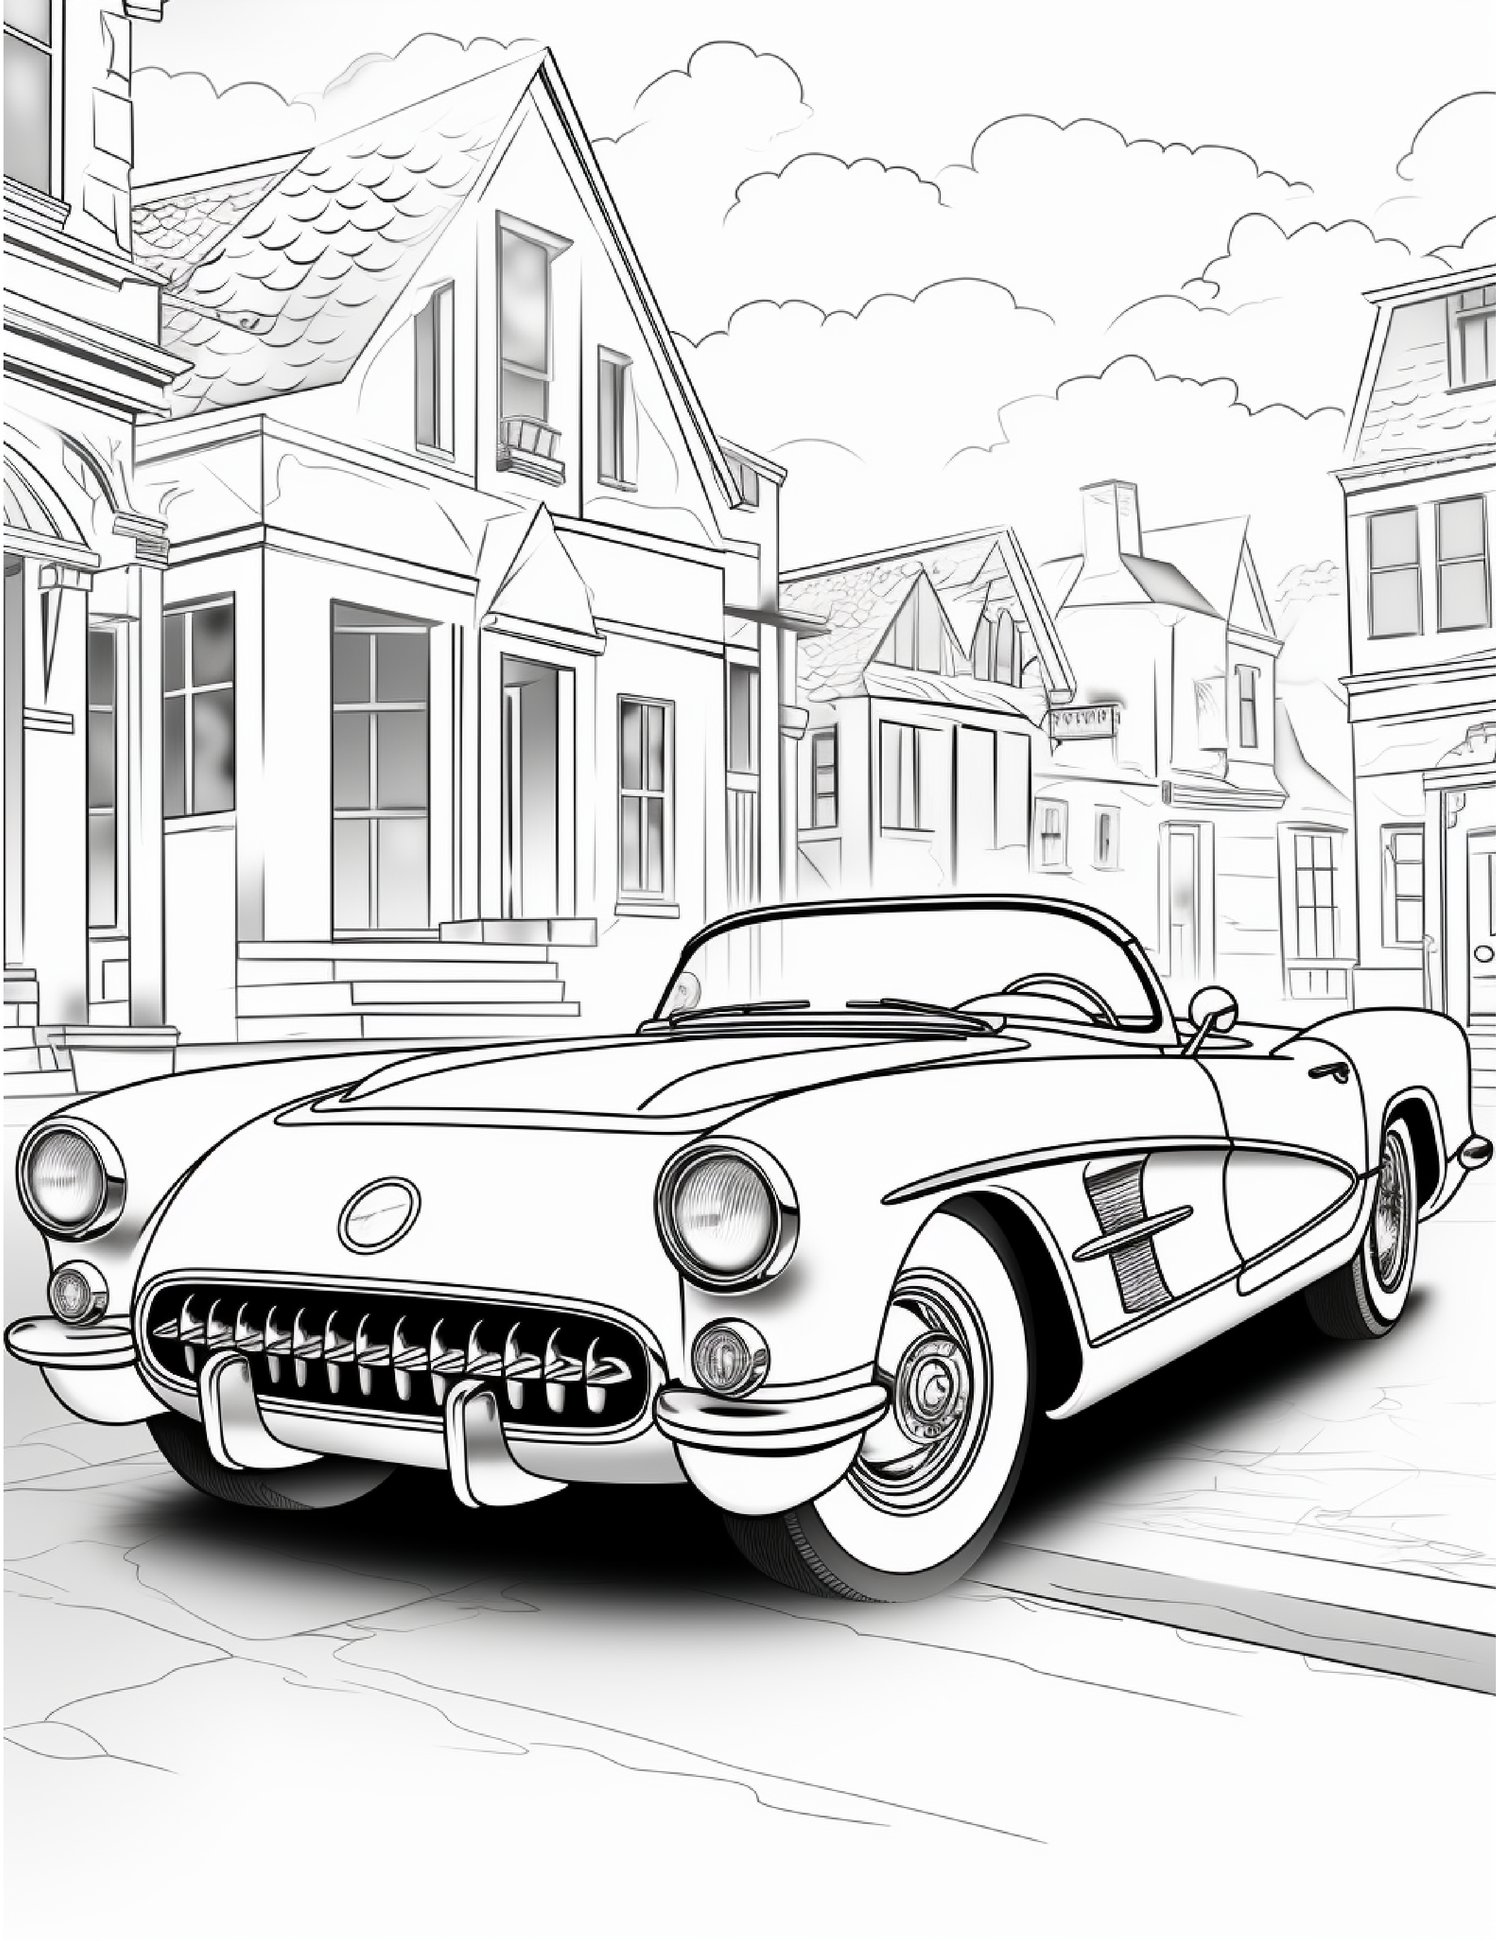 Classic cars coloring book for adults